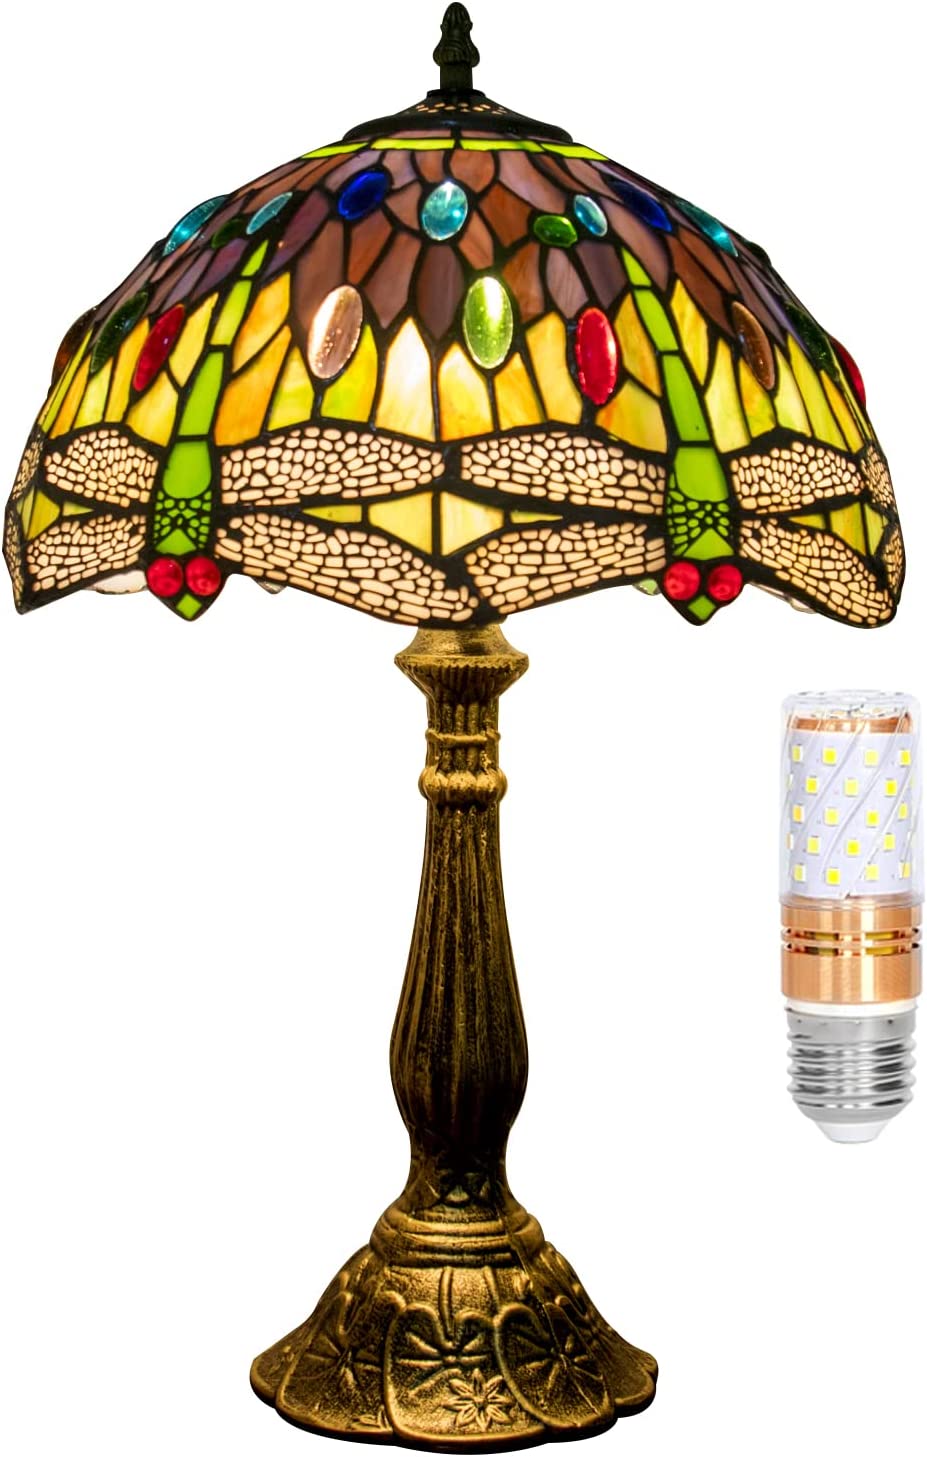 SHADY  Lamp Stained Glass Lamp Dragonfly Bedroom Table Lamp Reading Desk Light for Bedside Living Room Office Dormitory Dining Room Decorate Housewarming  12x12x18 Include Light Bu